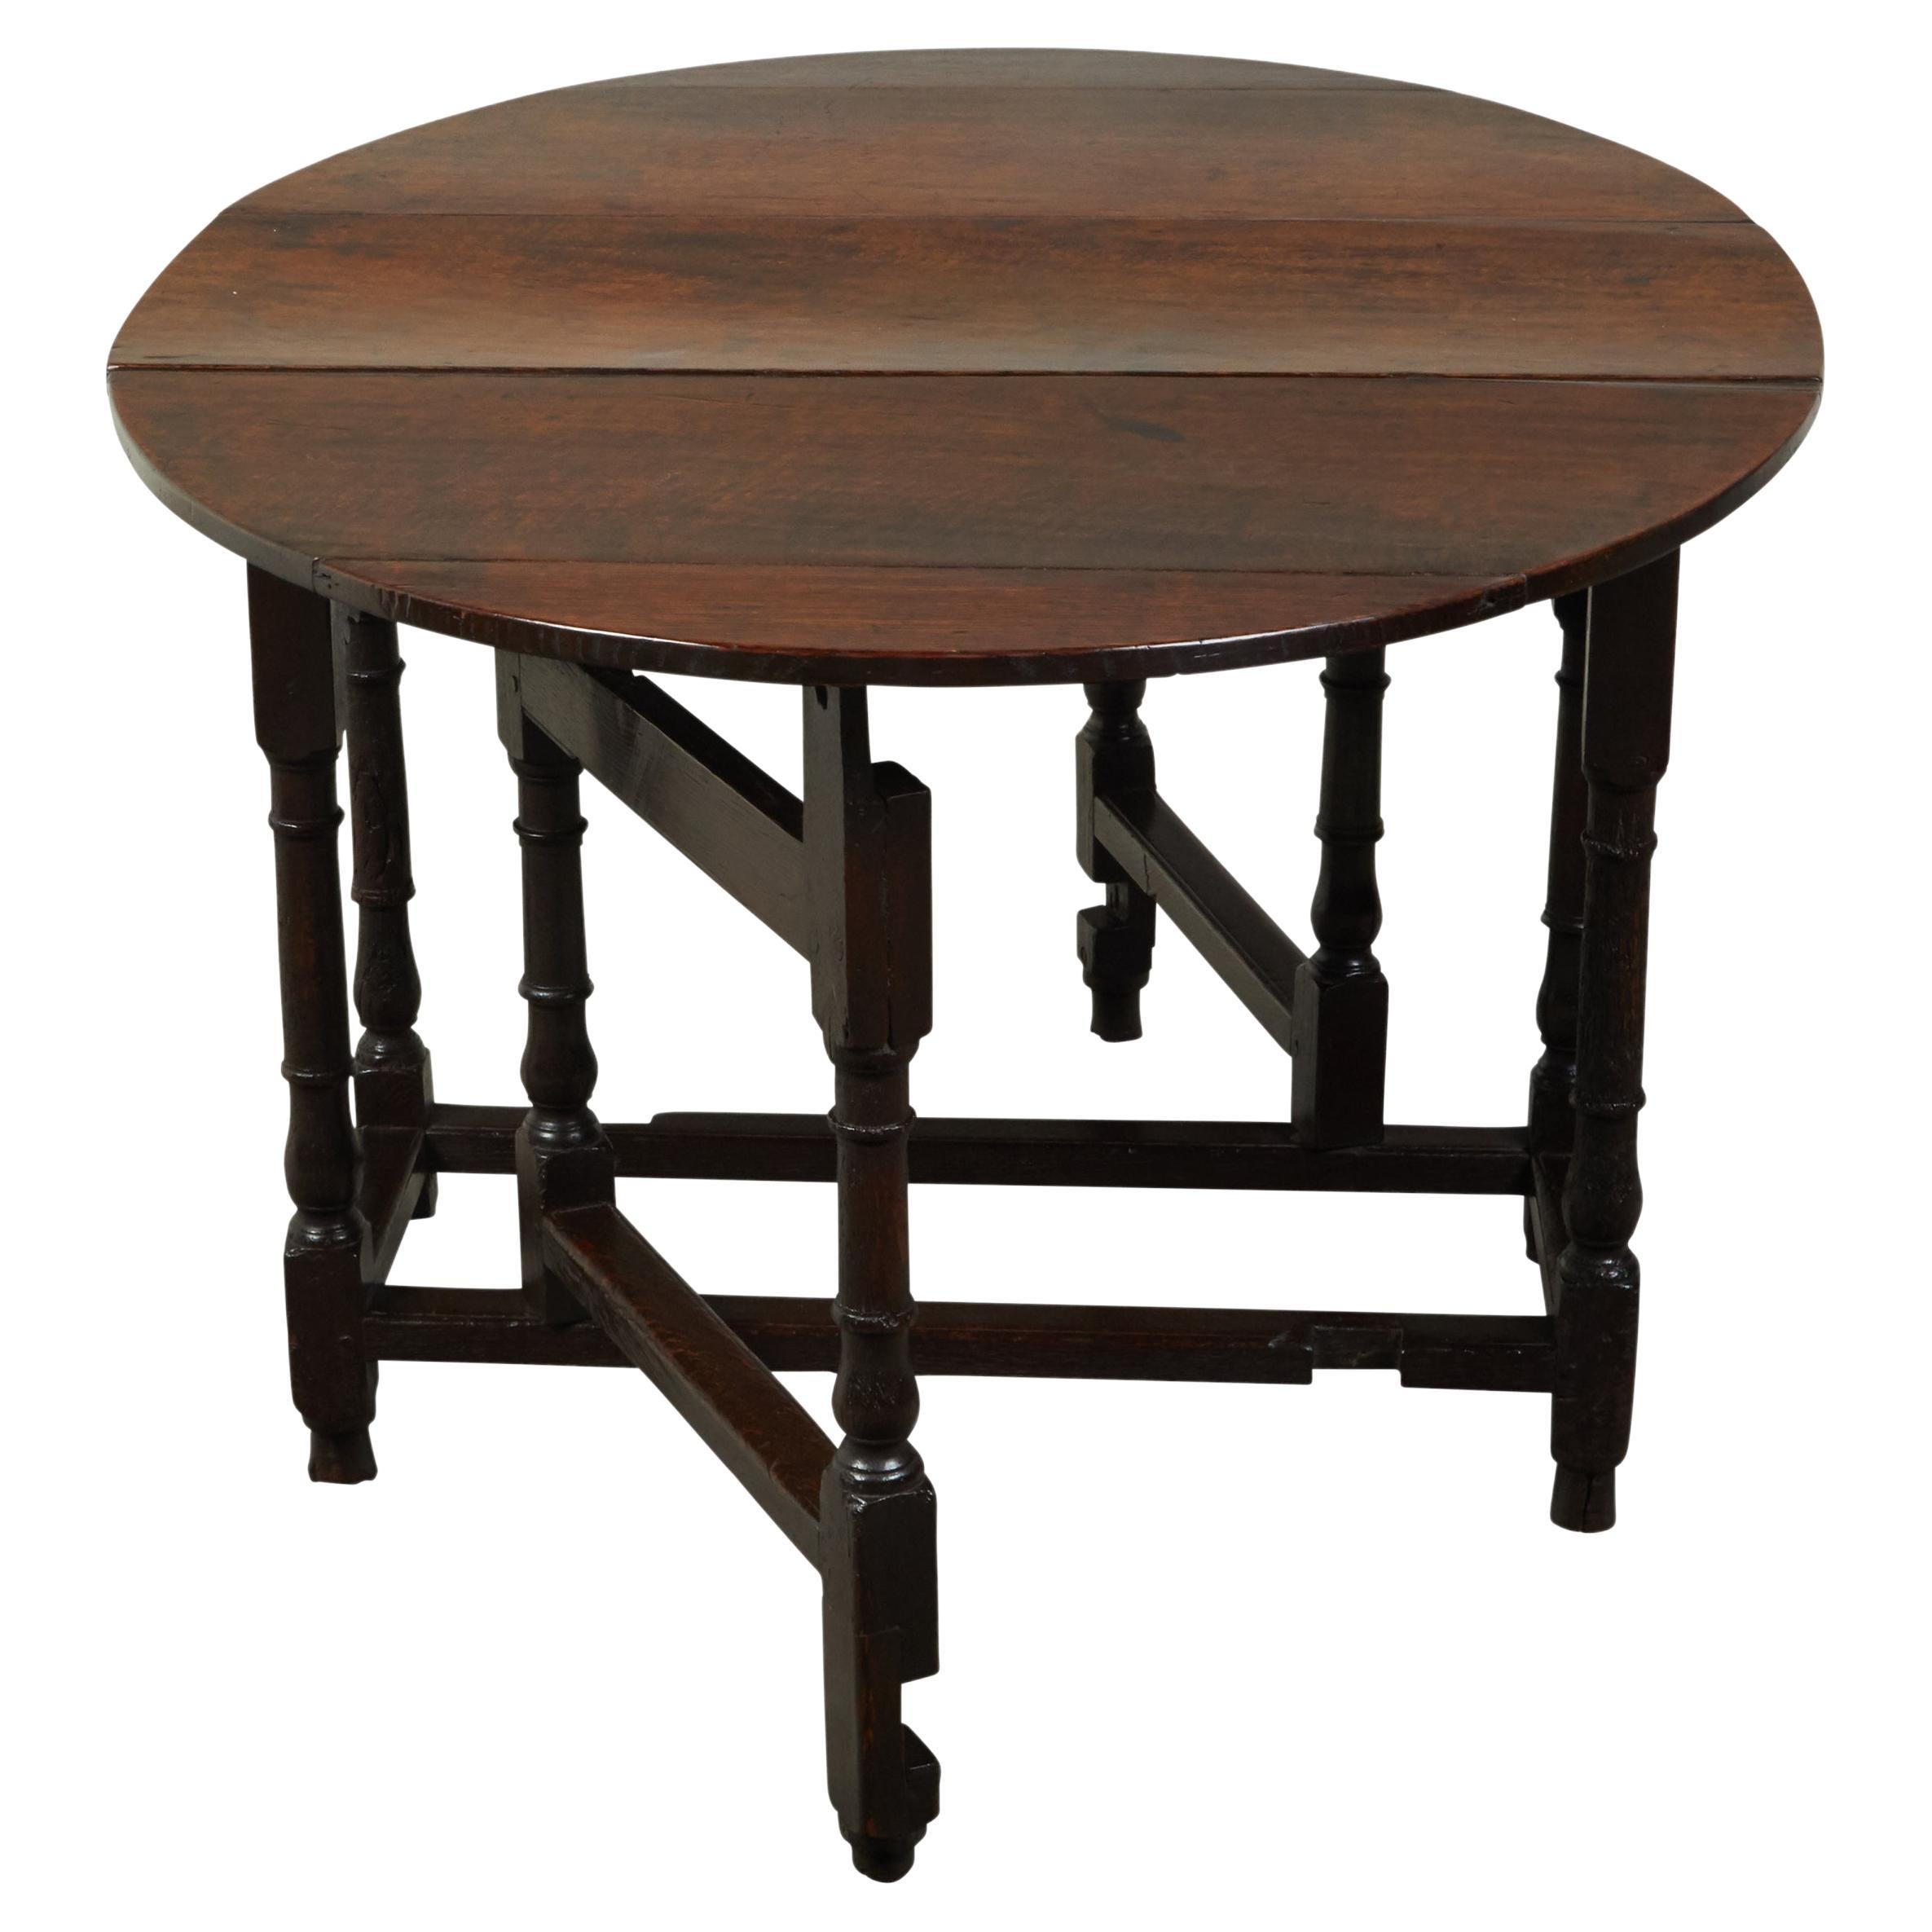 English 18th Century Oval Top Drop-Leaf Gateleg Table with Turned Legs